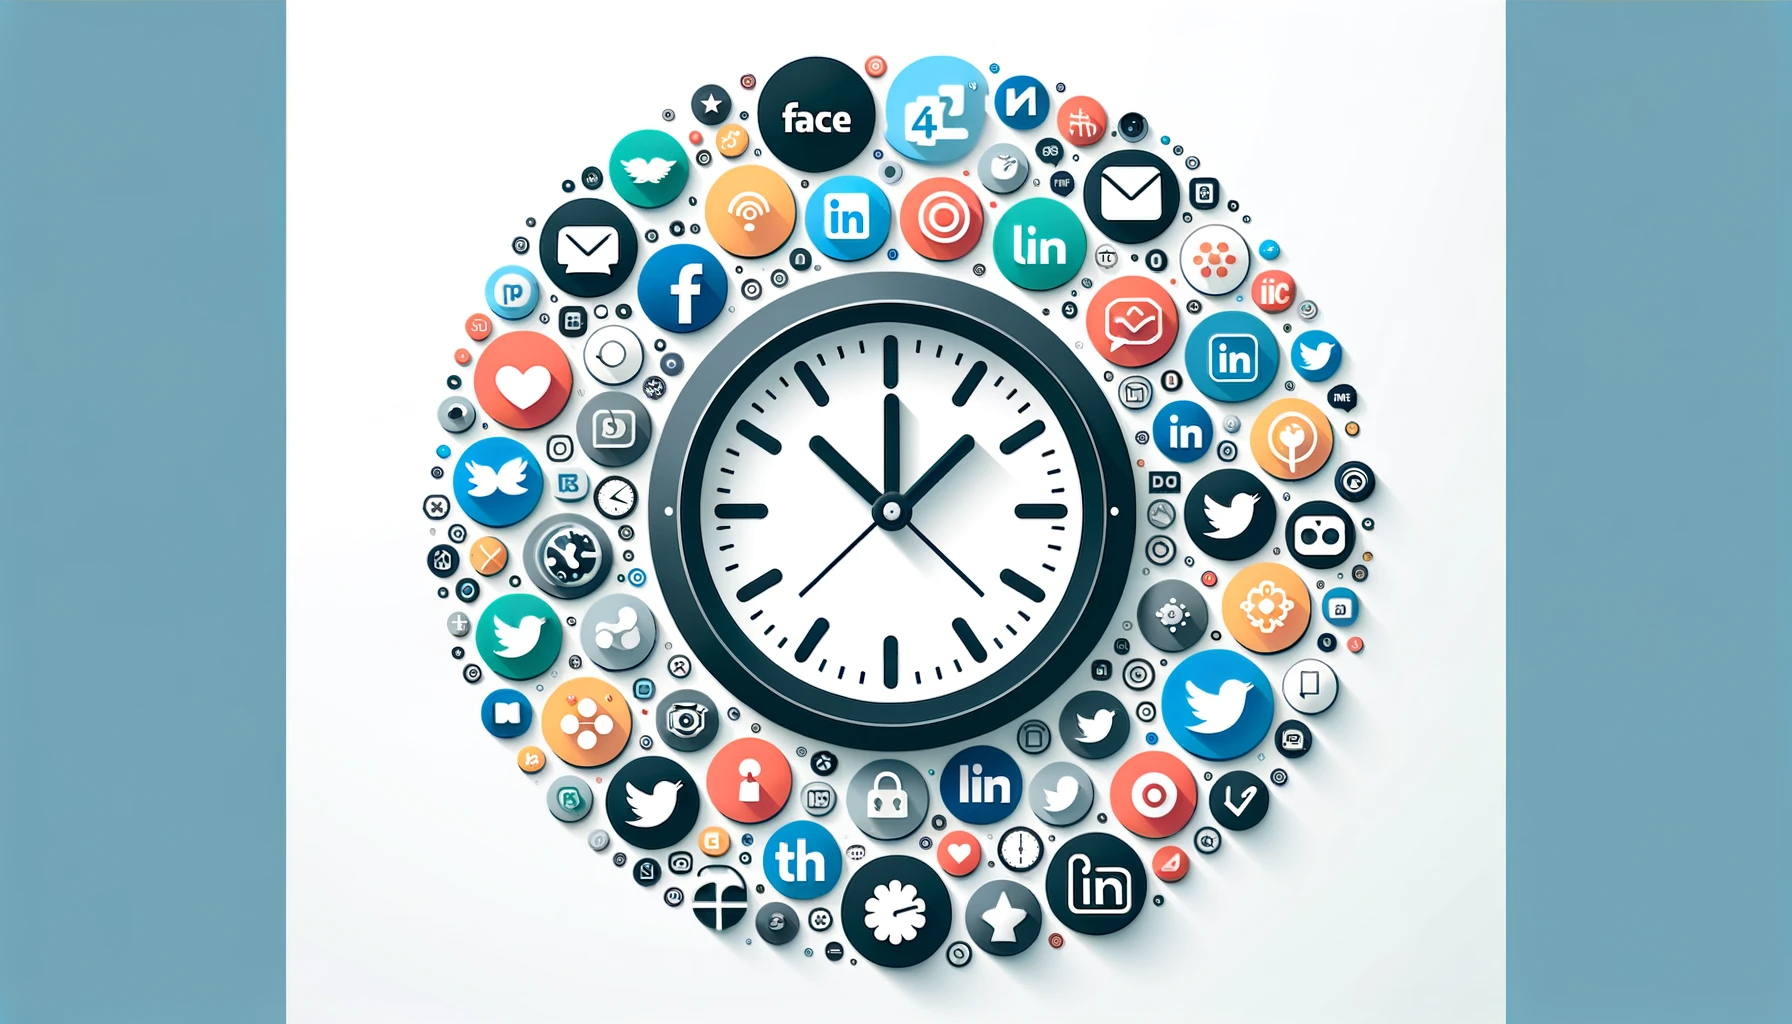 A graphic for blog post, "Discovering the Best Time of Day to Post on Social Media," featuring a central clock. Around the clock are icons of various social media platforms including Facebook, Twitter, and LinkedIn, representing the theme of time management in social media engagement.